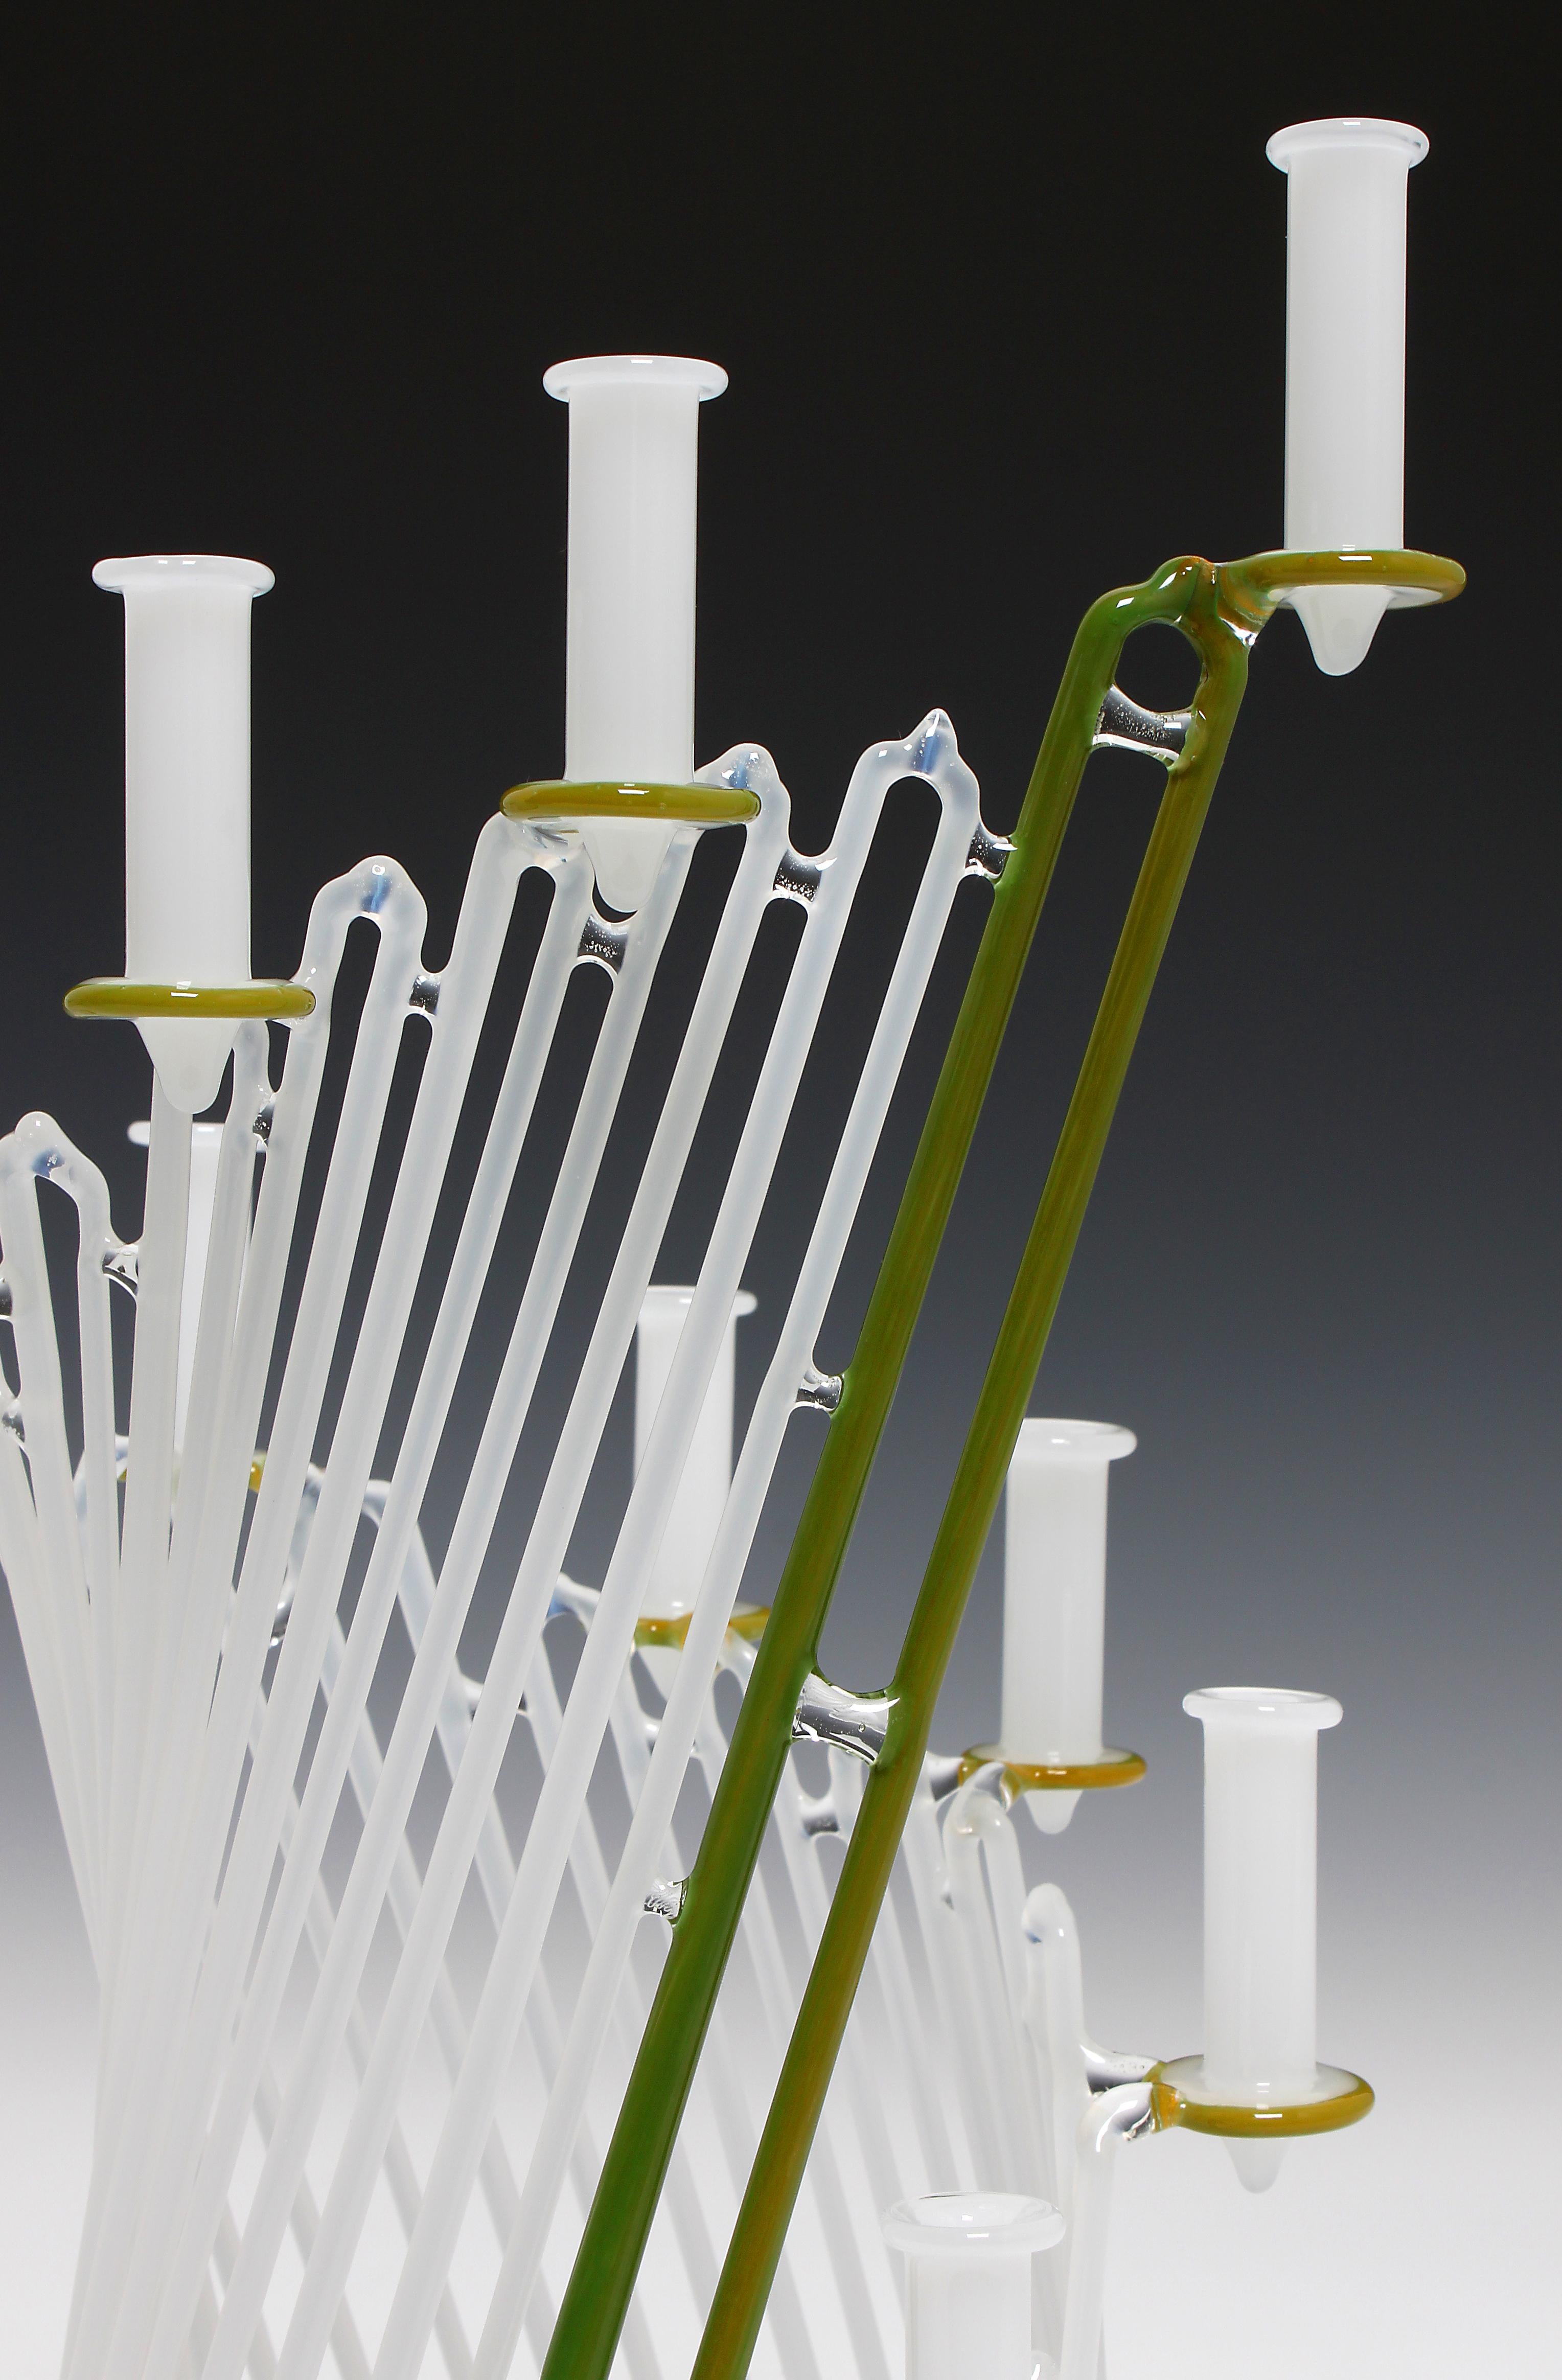 Green & White Menorah - Contemporary Sculpture by Micah Evans